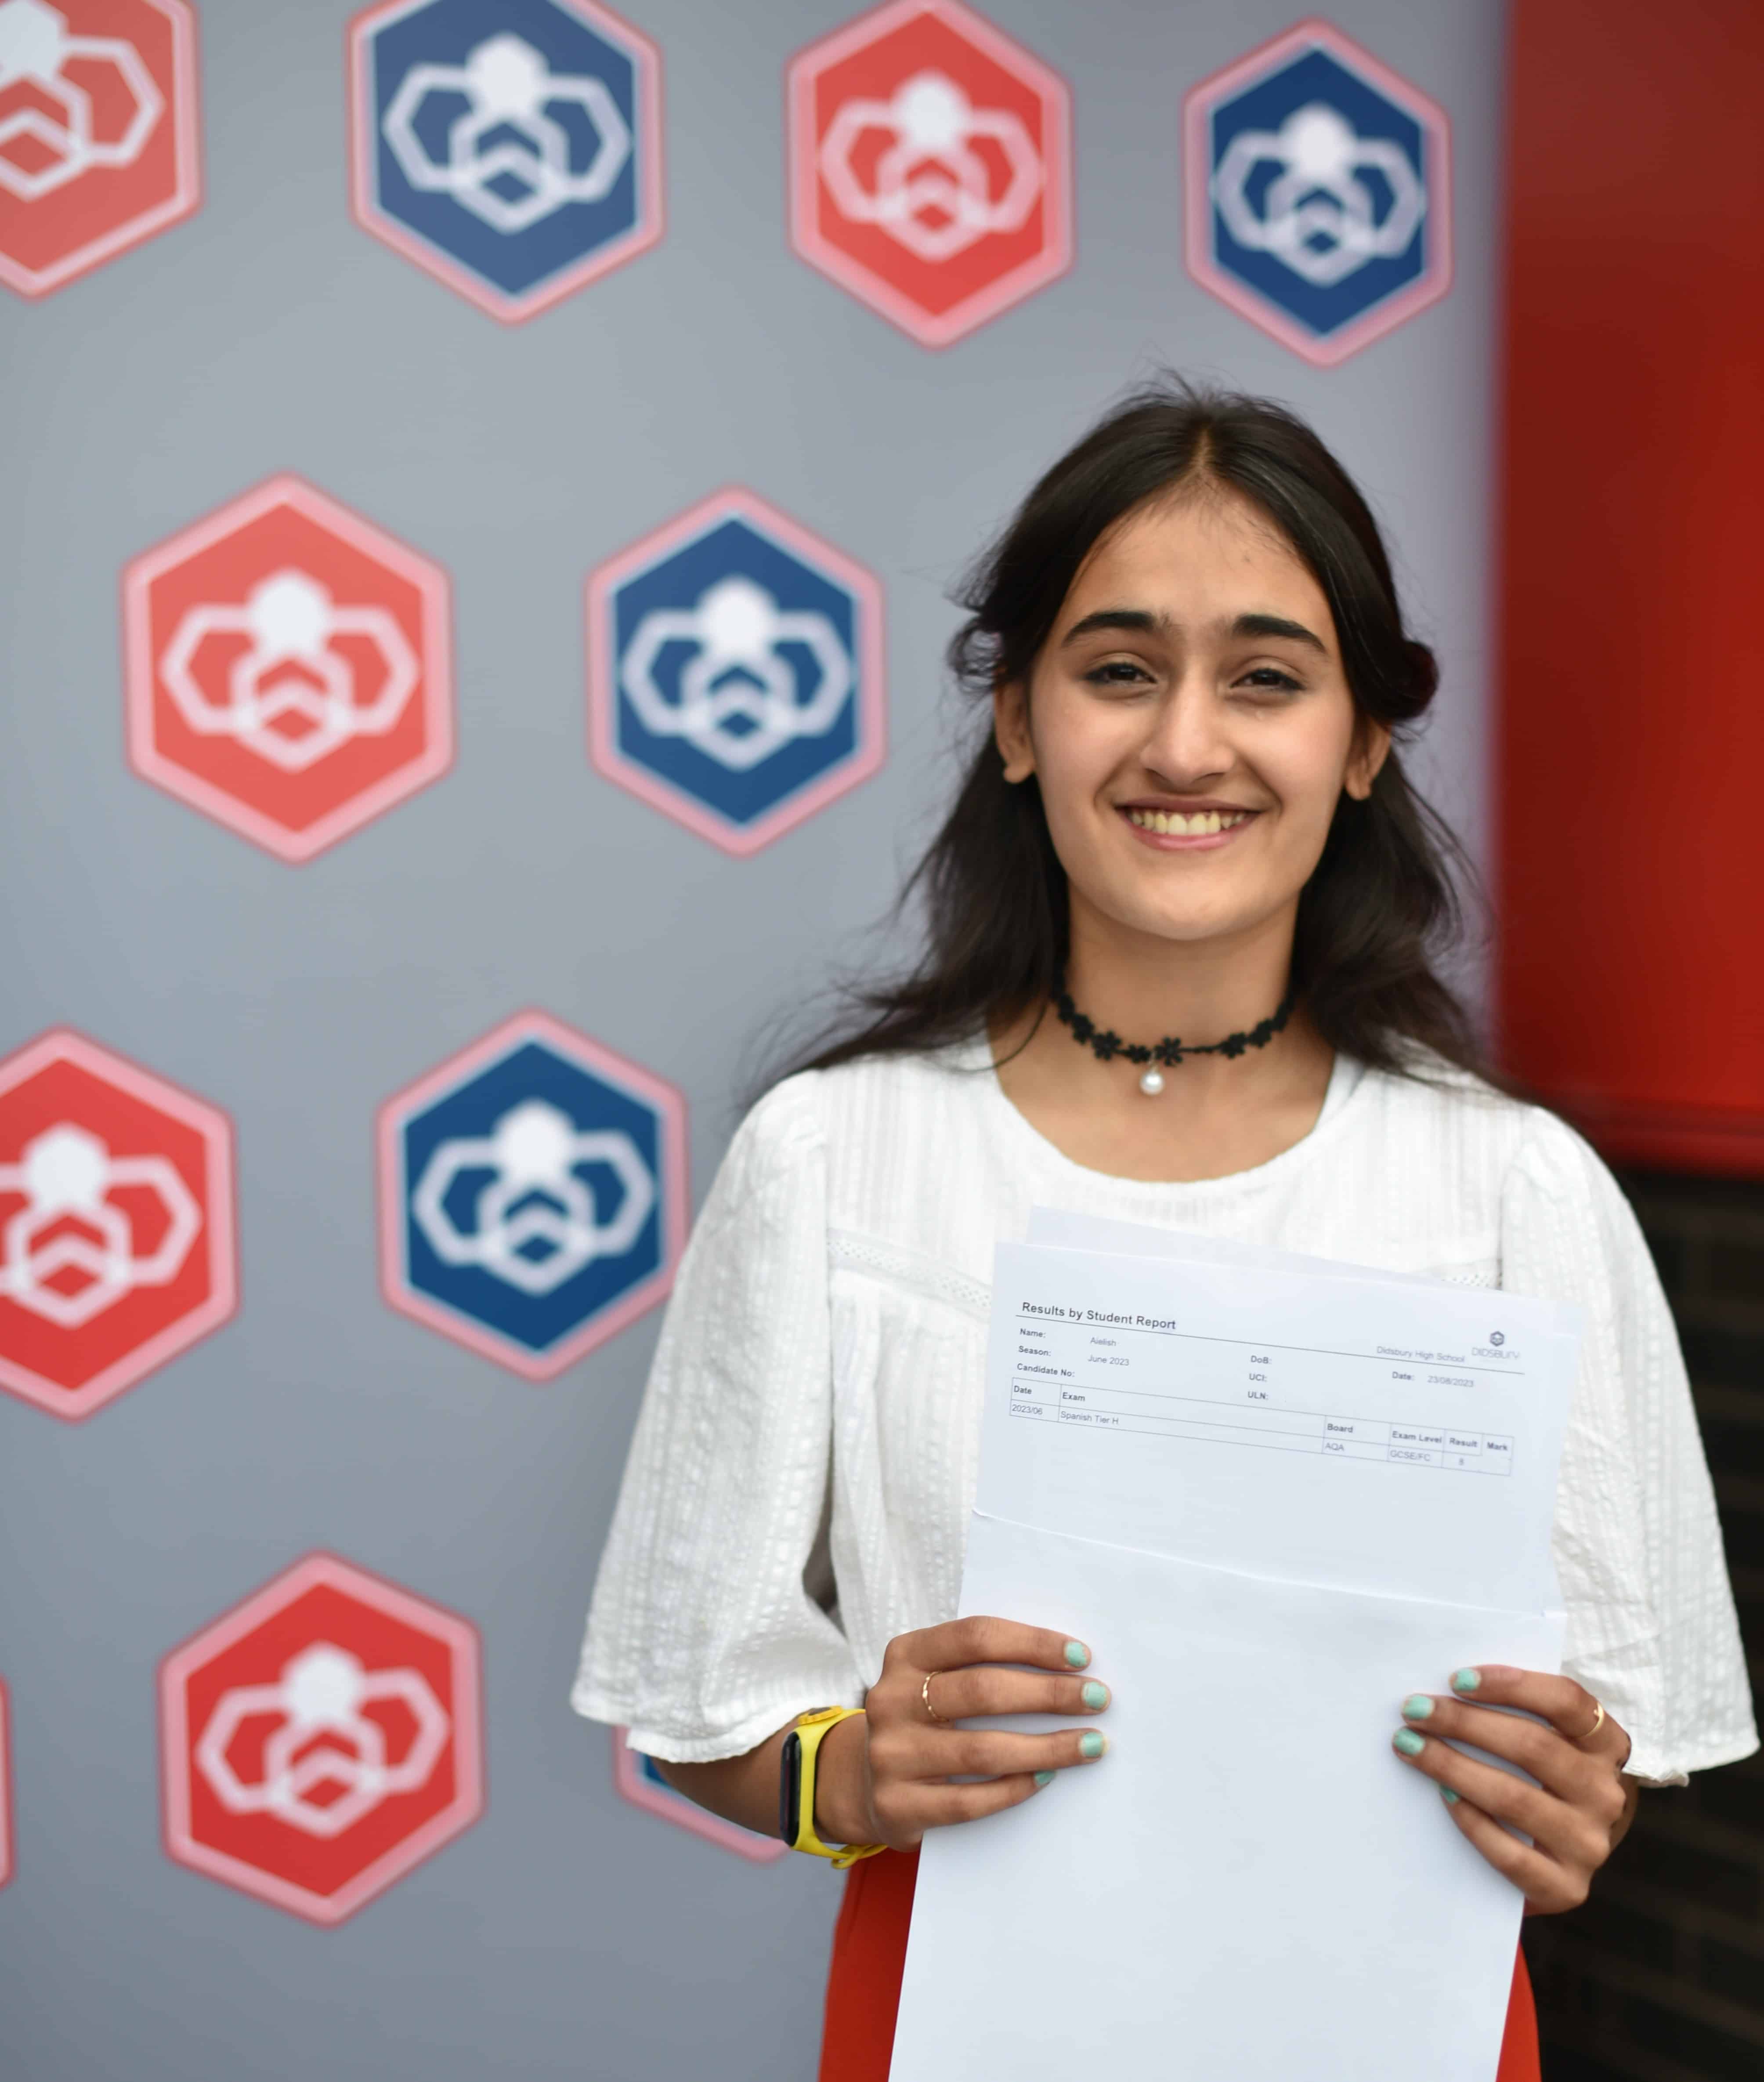 A Didsbury High School student holds her GCSE results and smiles